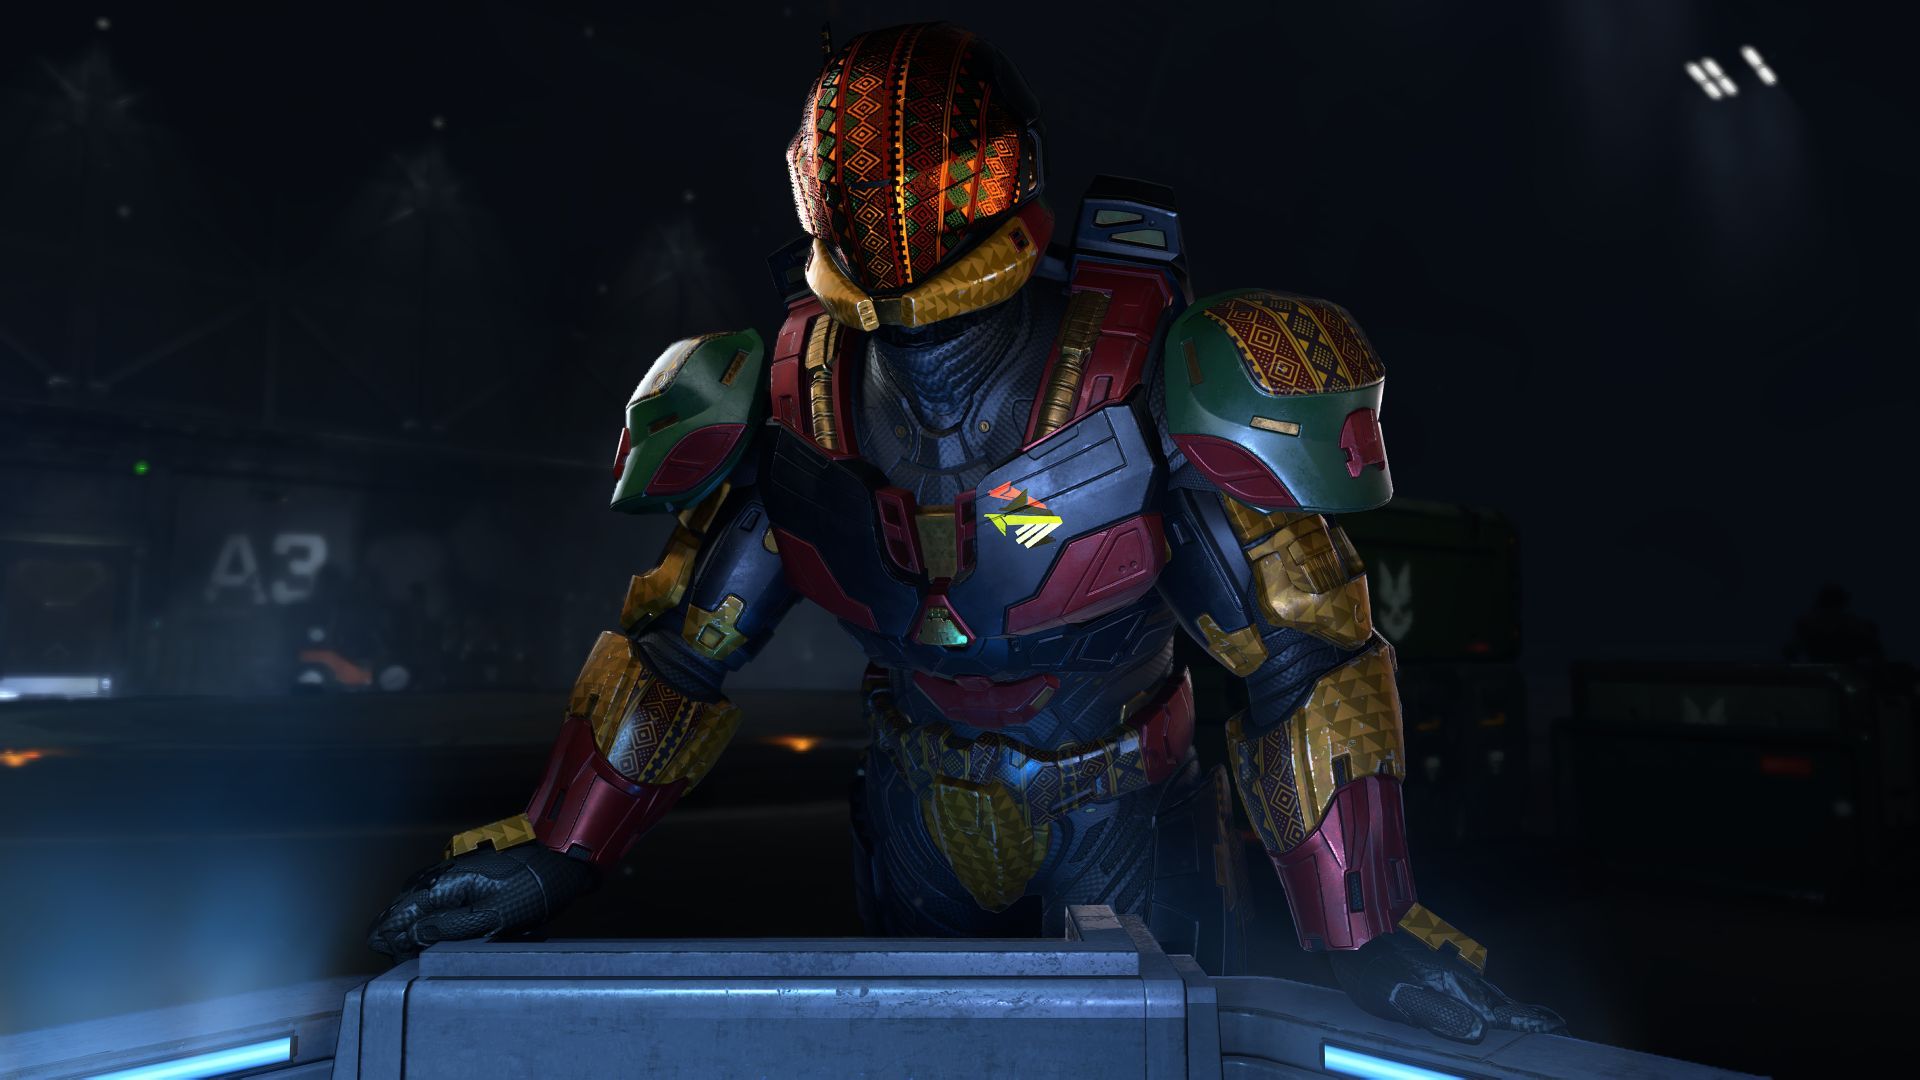 Image of a Spartan in Halo Infinite in Black History Month custom armor coating and visor.